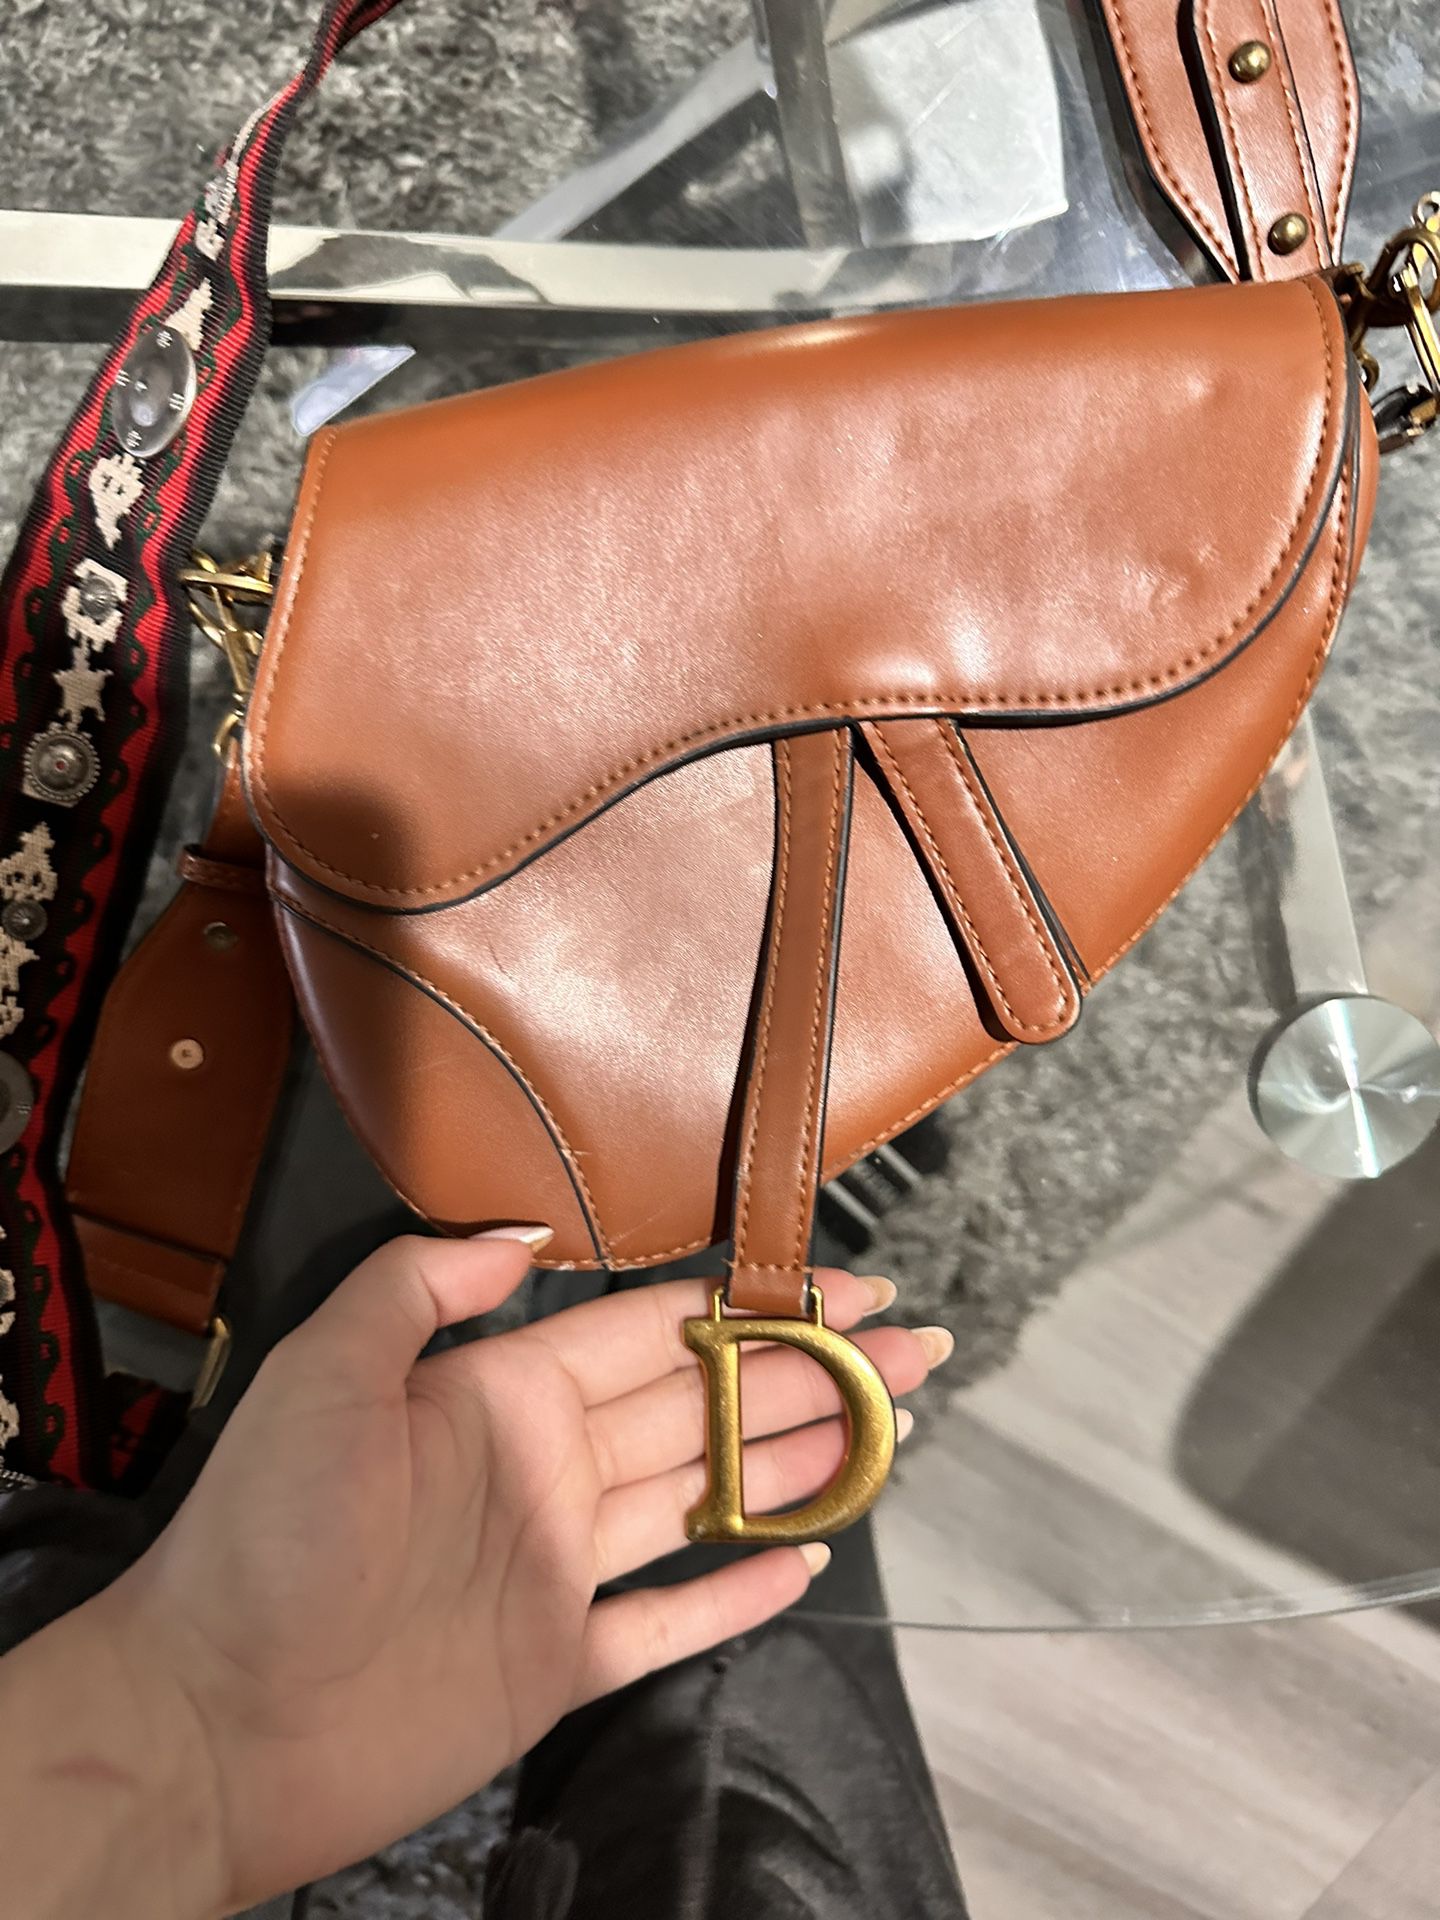 Dior Side Bag for Sale in Los Angeles, CA - OfferUp